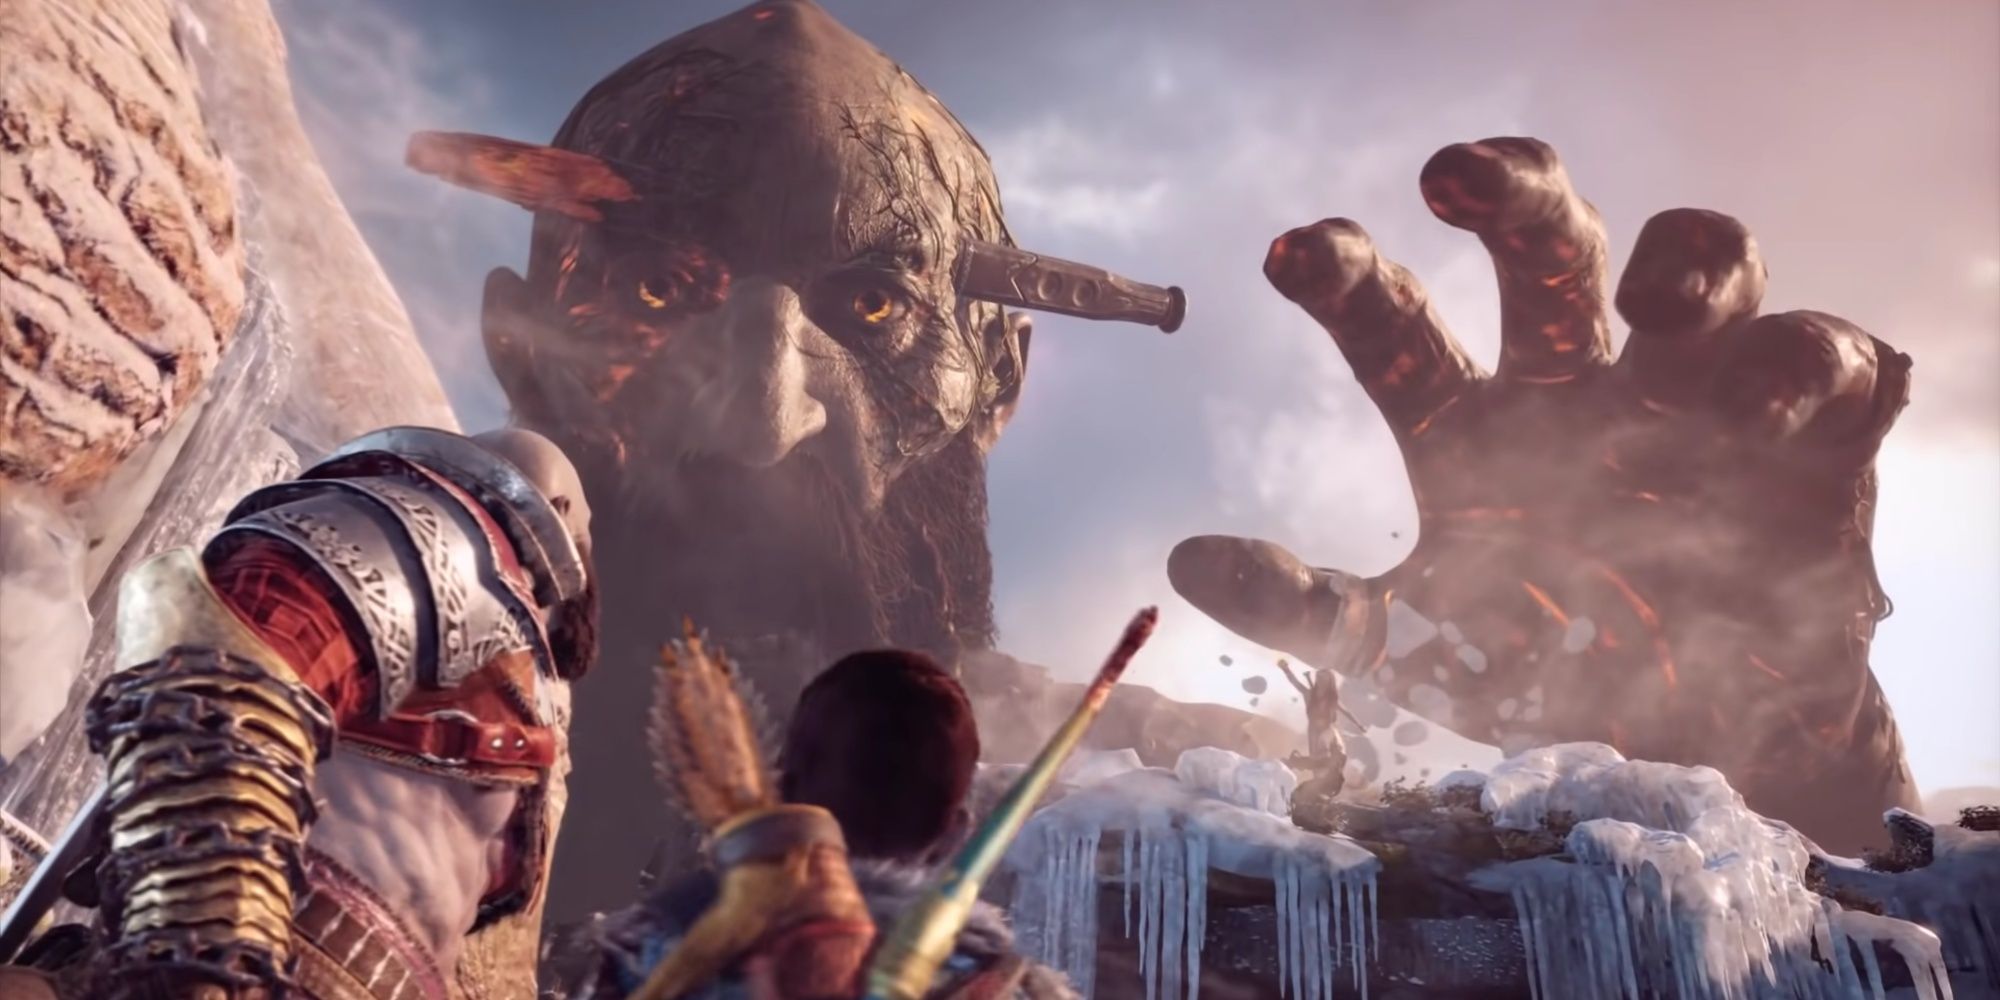 The formerly dead giant Thamur being brought back to life by Freya's magic, reaching a giant hand out toward Kratos and Atreus as they look up at it.